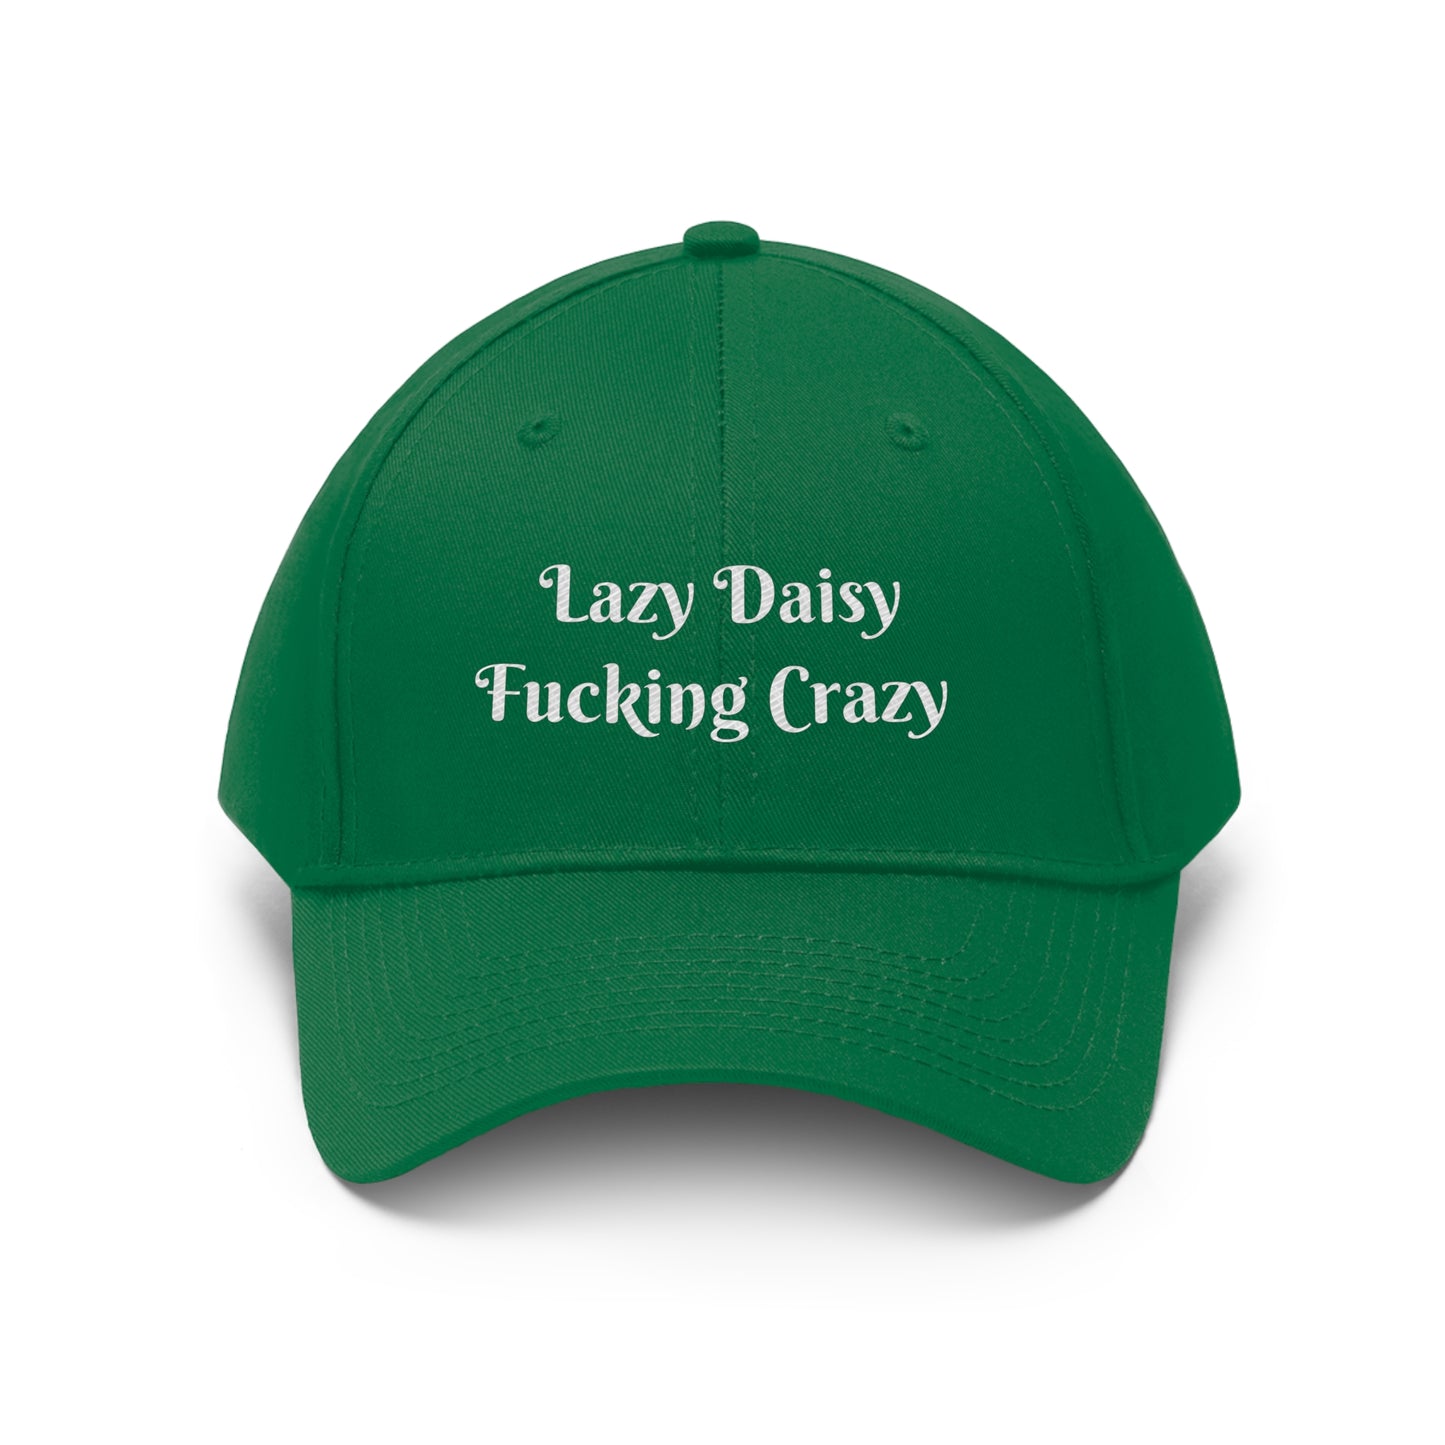 Lazy Daisy, Fucking Crazy Embroidered Hat for Unapologetically Fun Style